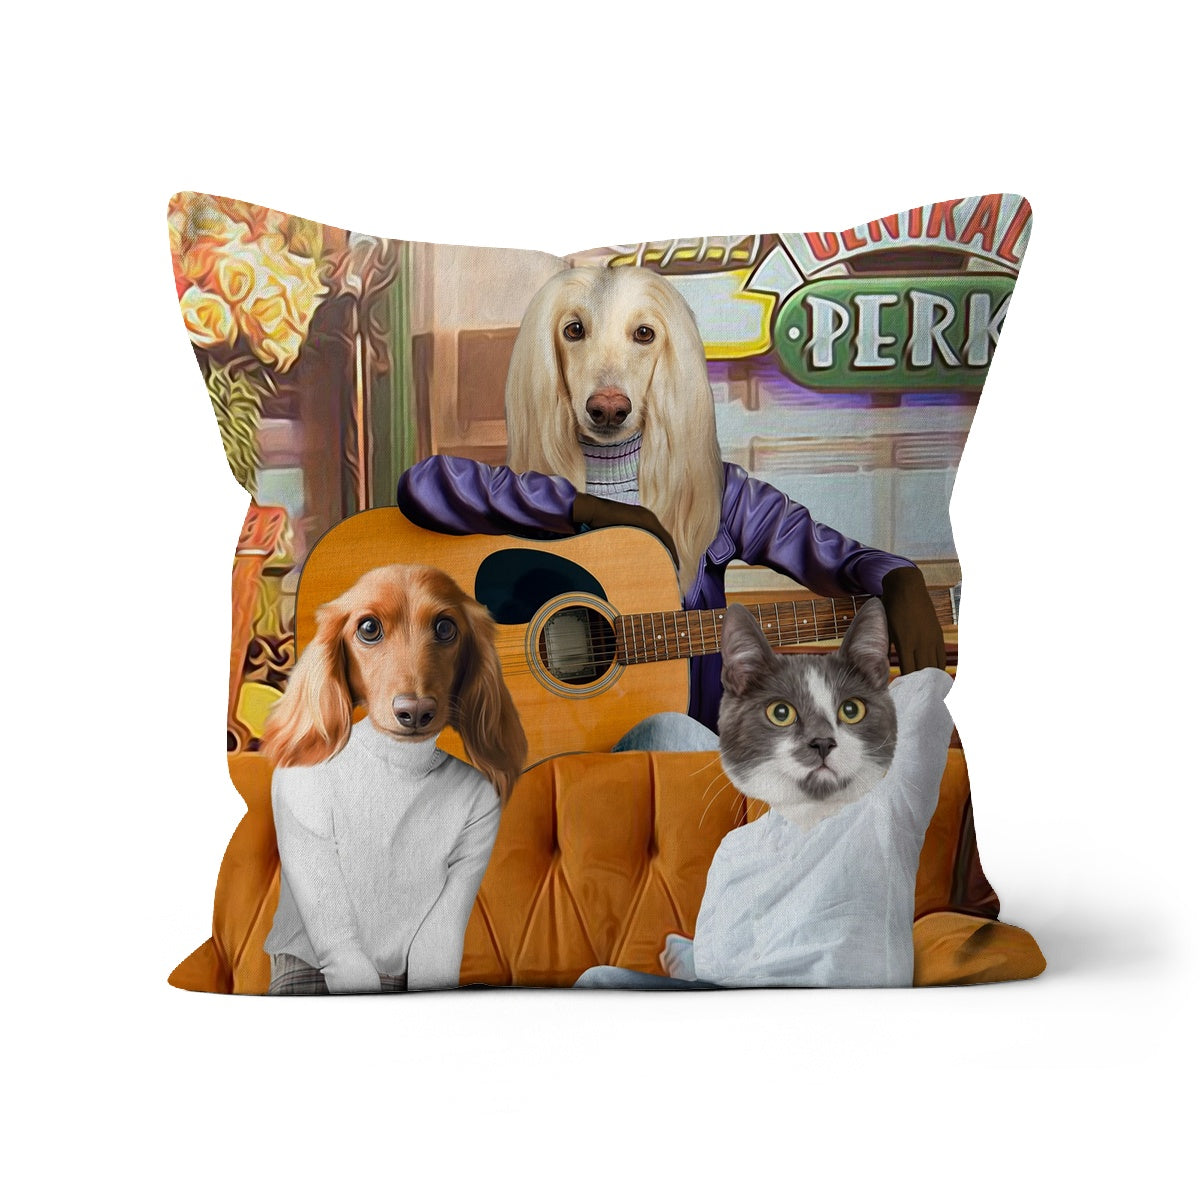 Pet Pillow  Cozy Up with Custom Pet Pillows, Custom Dog Pillows, and  Personalized Pet Pillow Options - Cuddle Clones